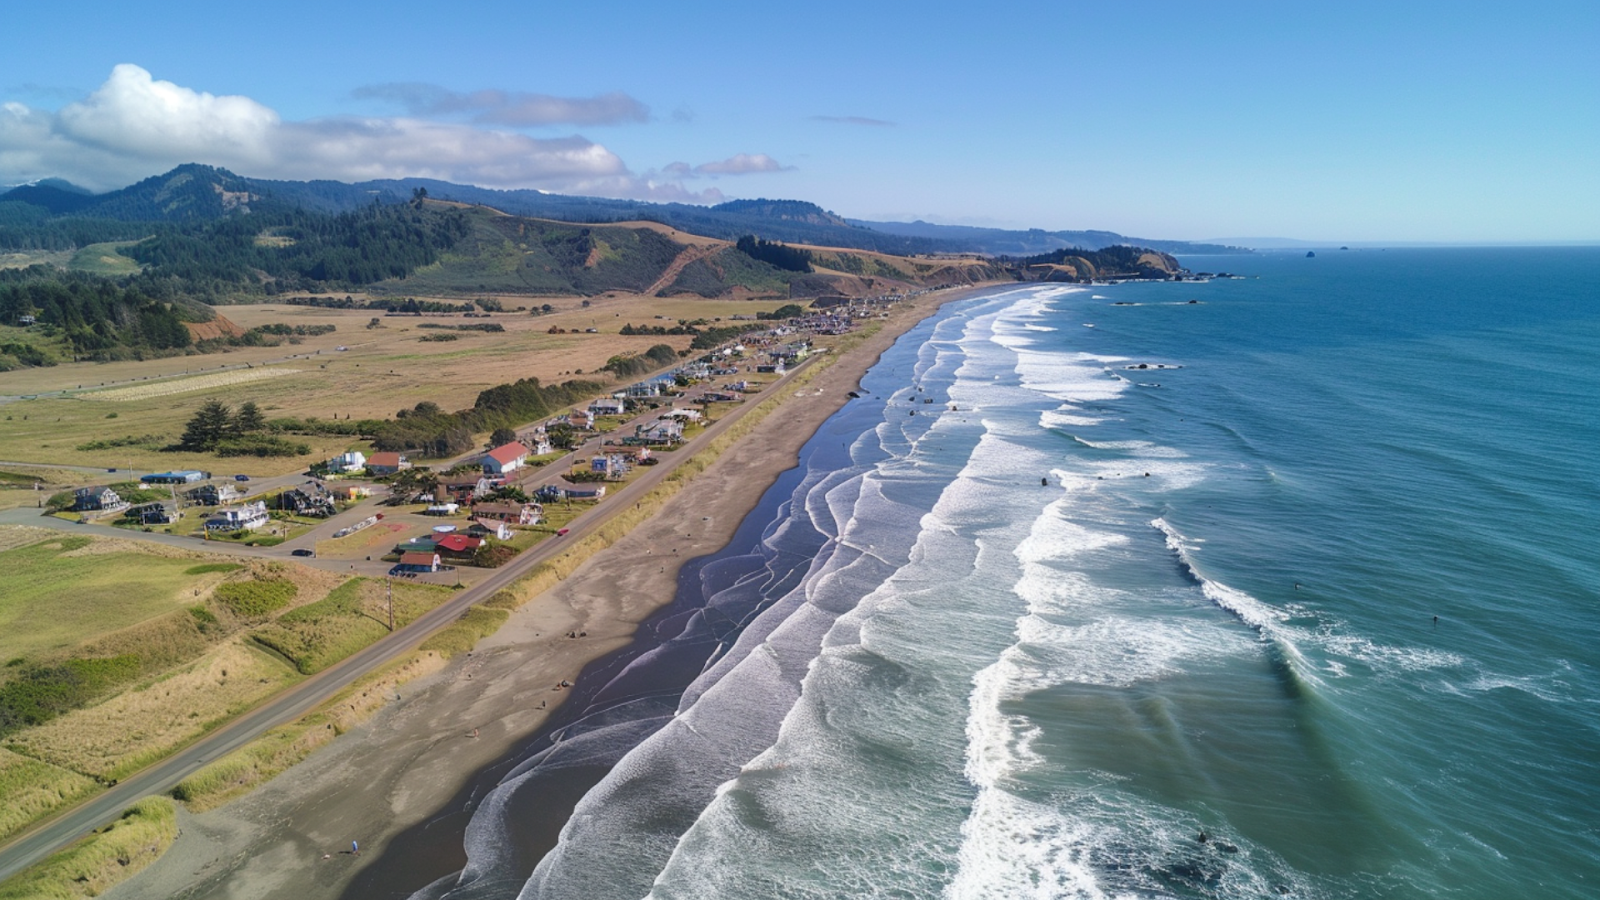 An aerial shot of Gold Beach, USA showing coastal homes and the mountains on the other side